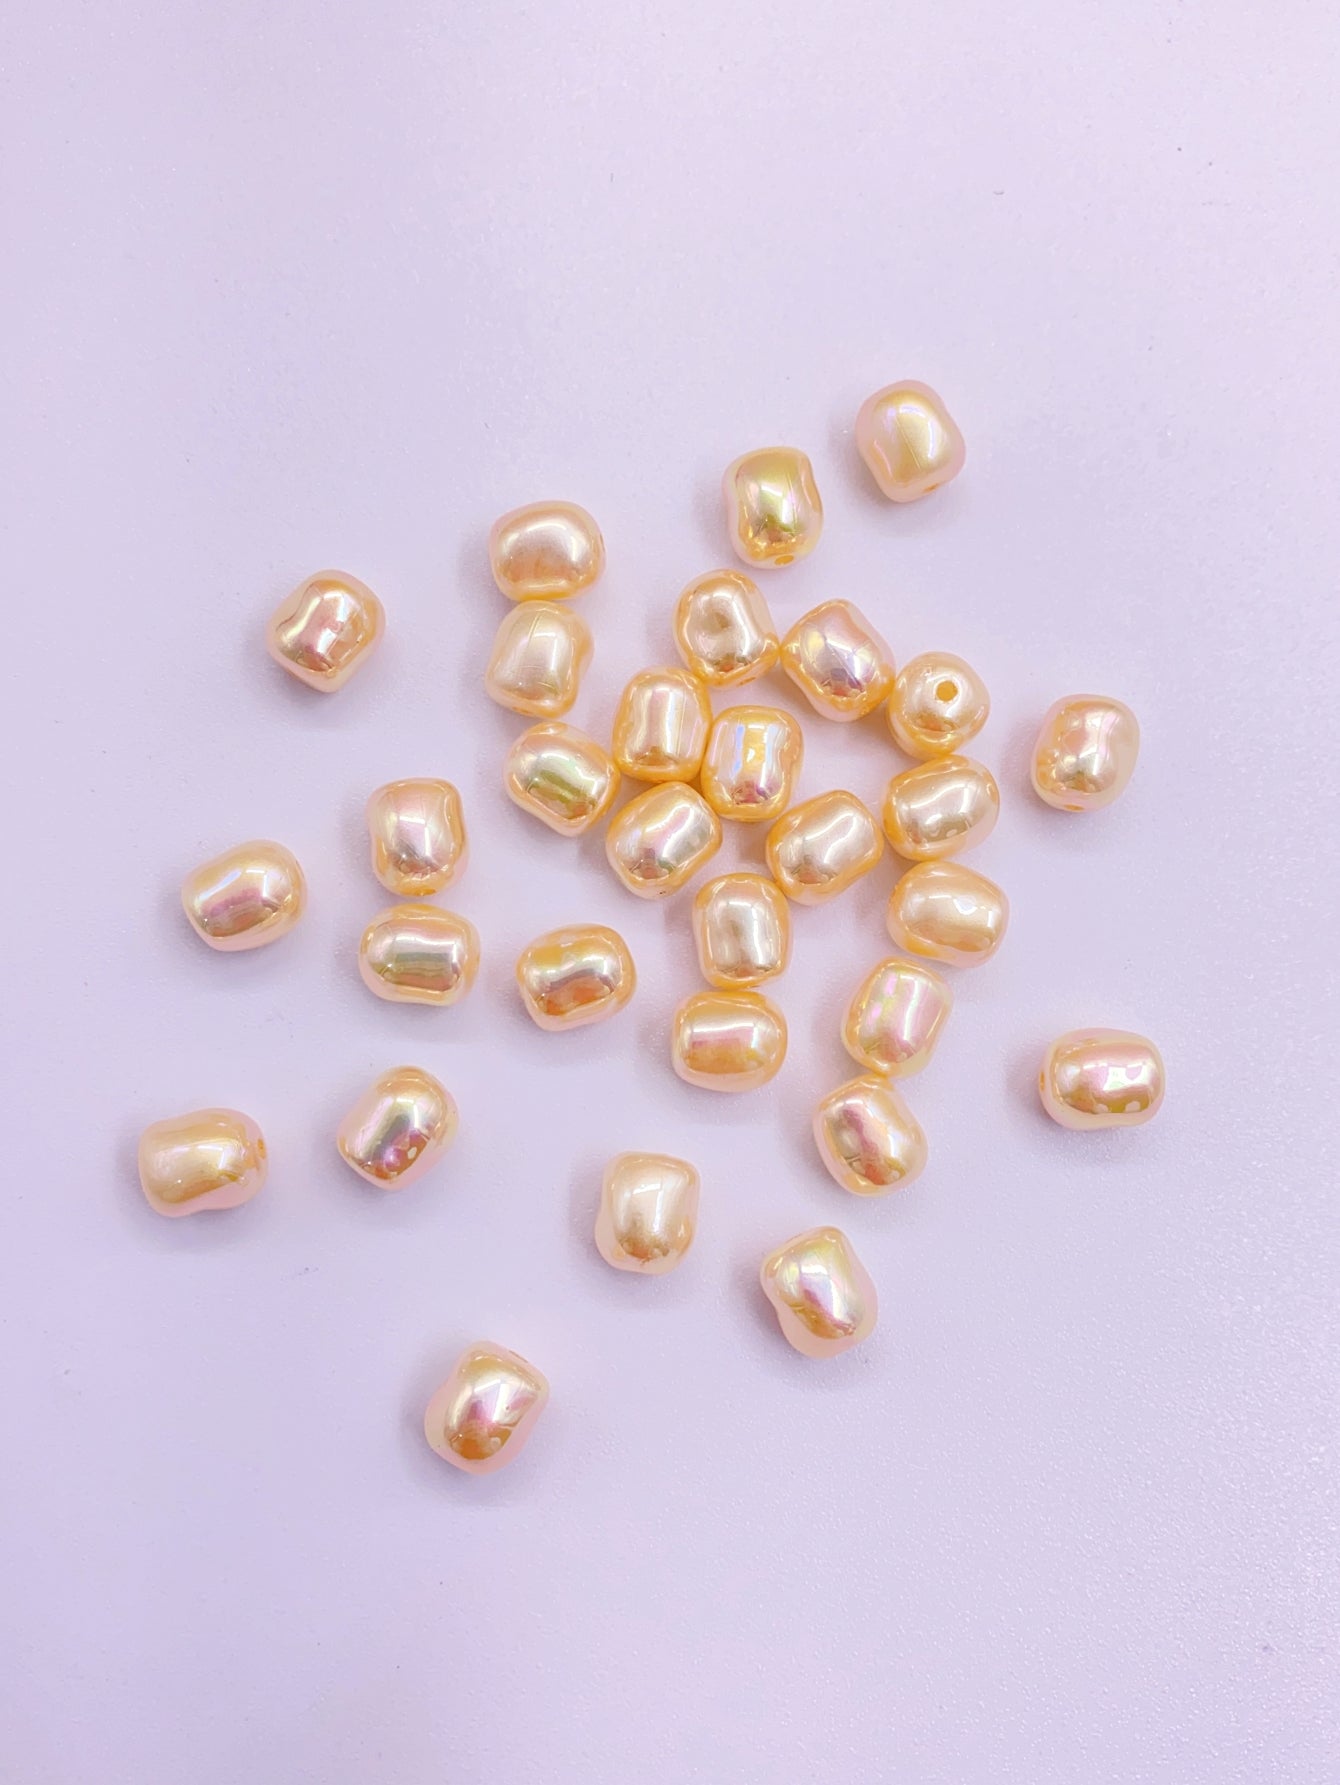 New abs shaped cylindrical body straight hole imitation pearl jewelry accessories Beaded diy clothing jewelry bulk pearls